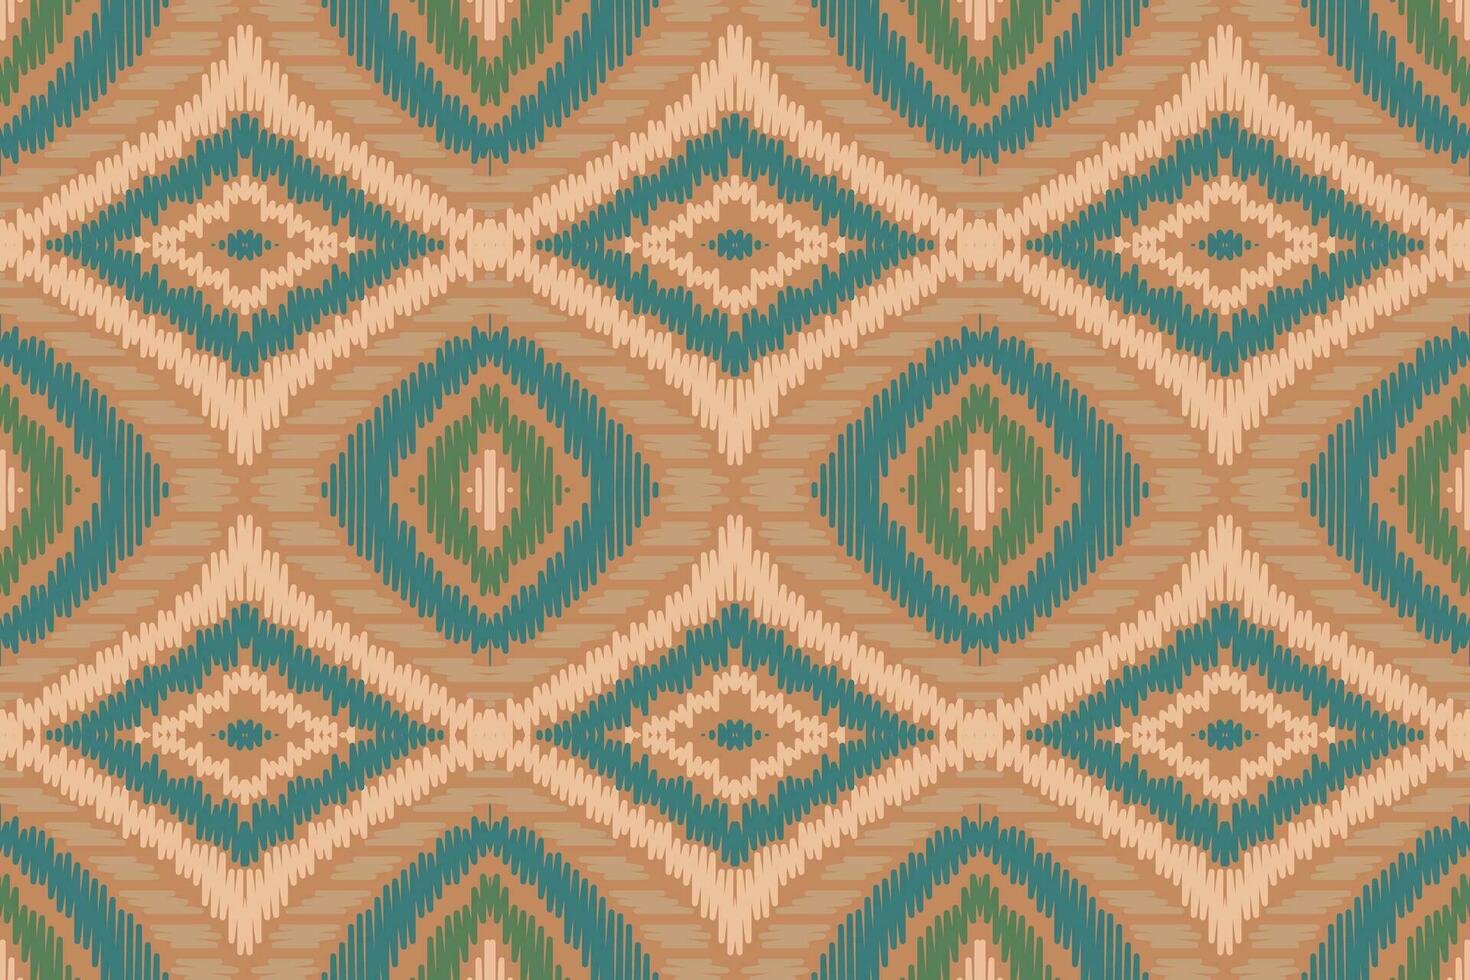 Ikat Damask Embroidery Background. Ikat Prints Geometric Ethnic Oriental Pattern traditional.aztec Style Abstract Vector illustration.design for Texture,fabric,clothing,wrapping,sarong.